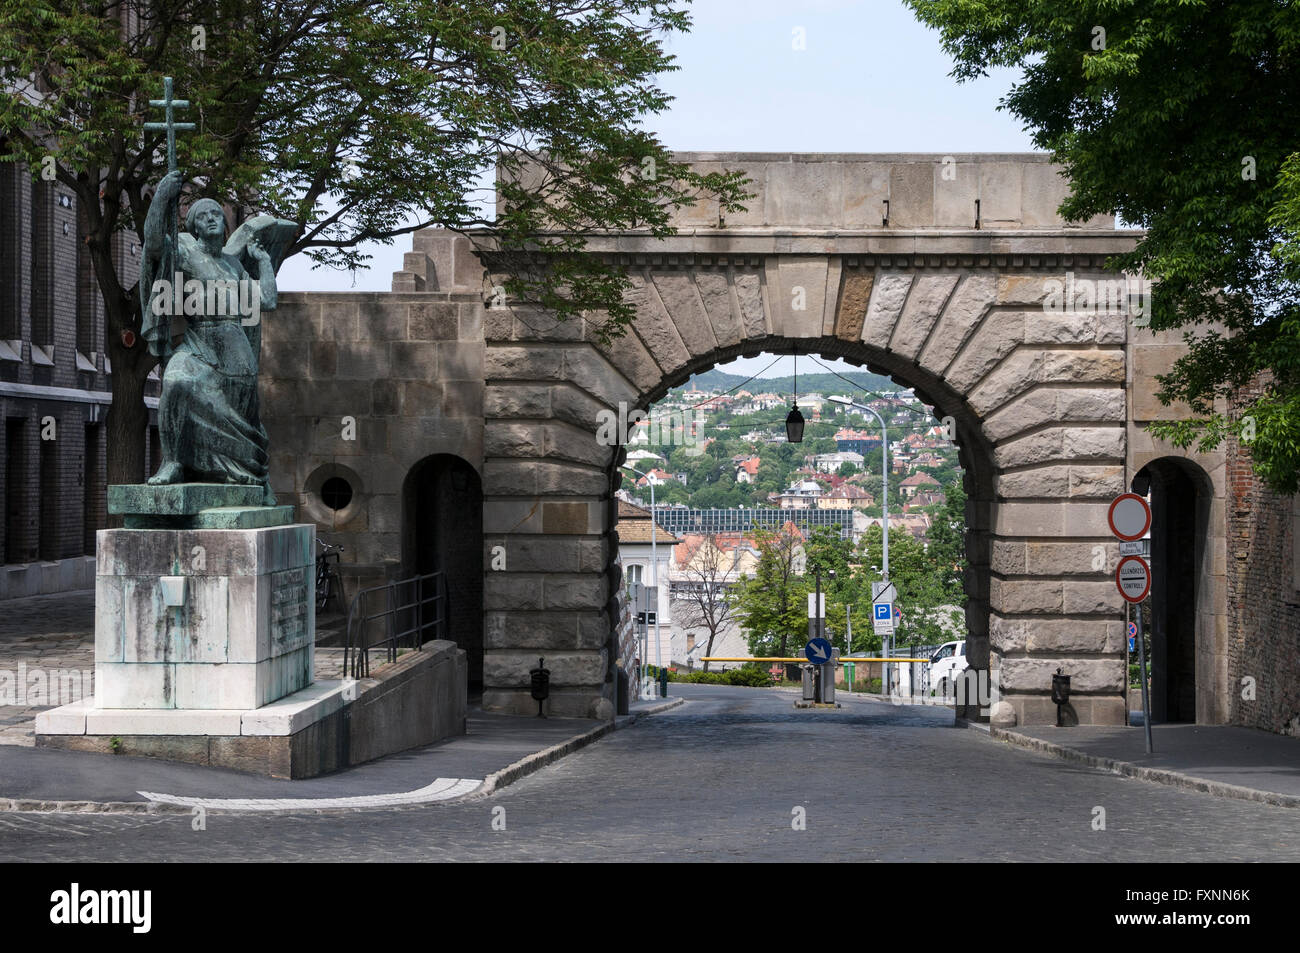 Vienna Gate is the only surviving gate on Buda Castle Hill, Budapest, Hungary. Stock Photo